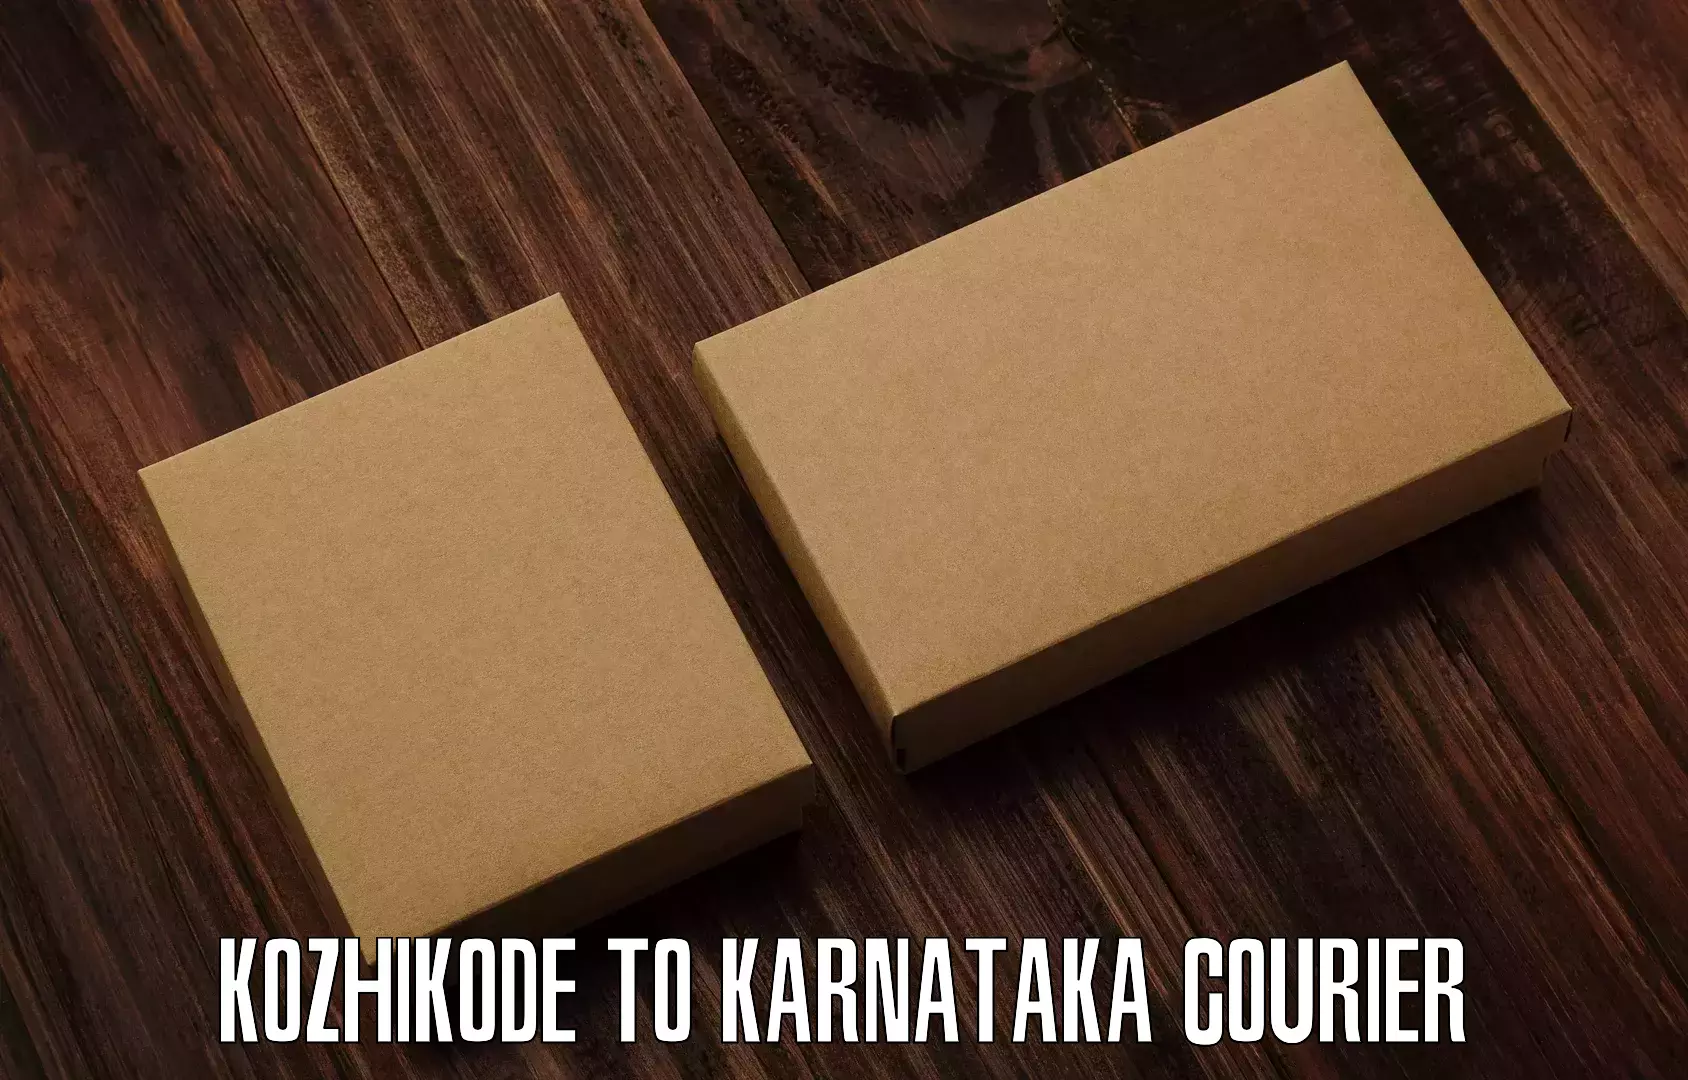 Smart shipping technology Kozhikode to Dharwad